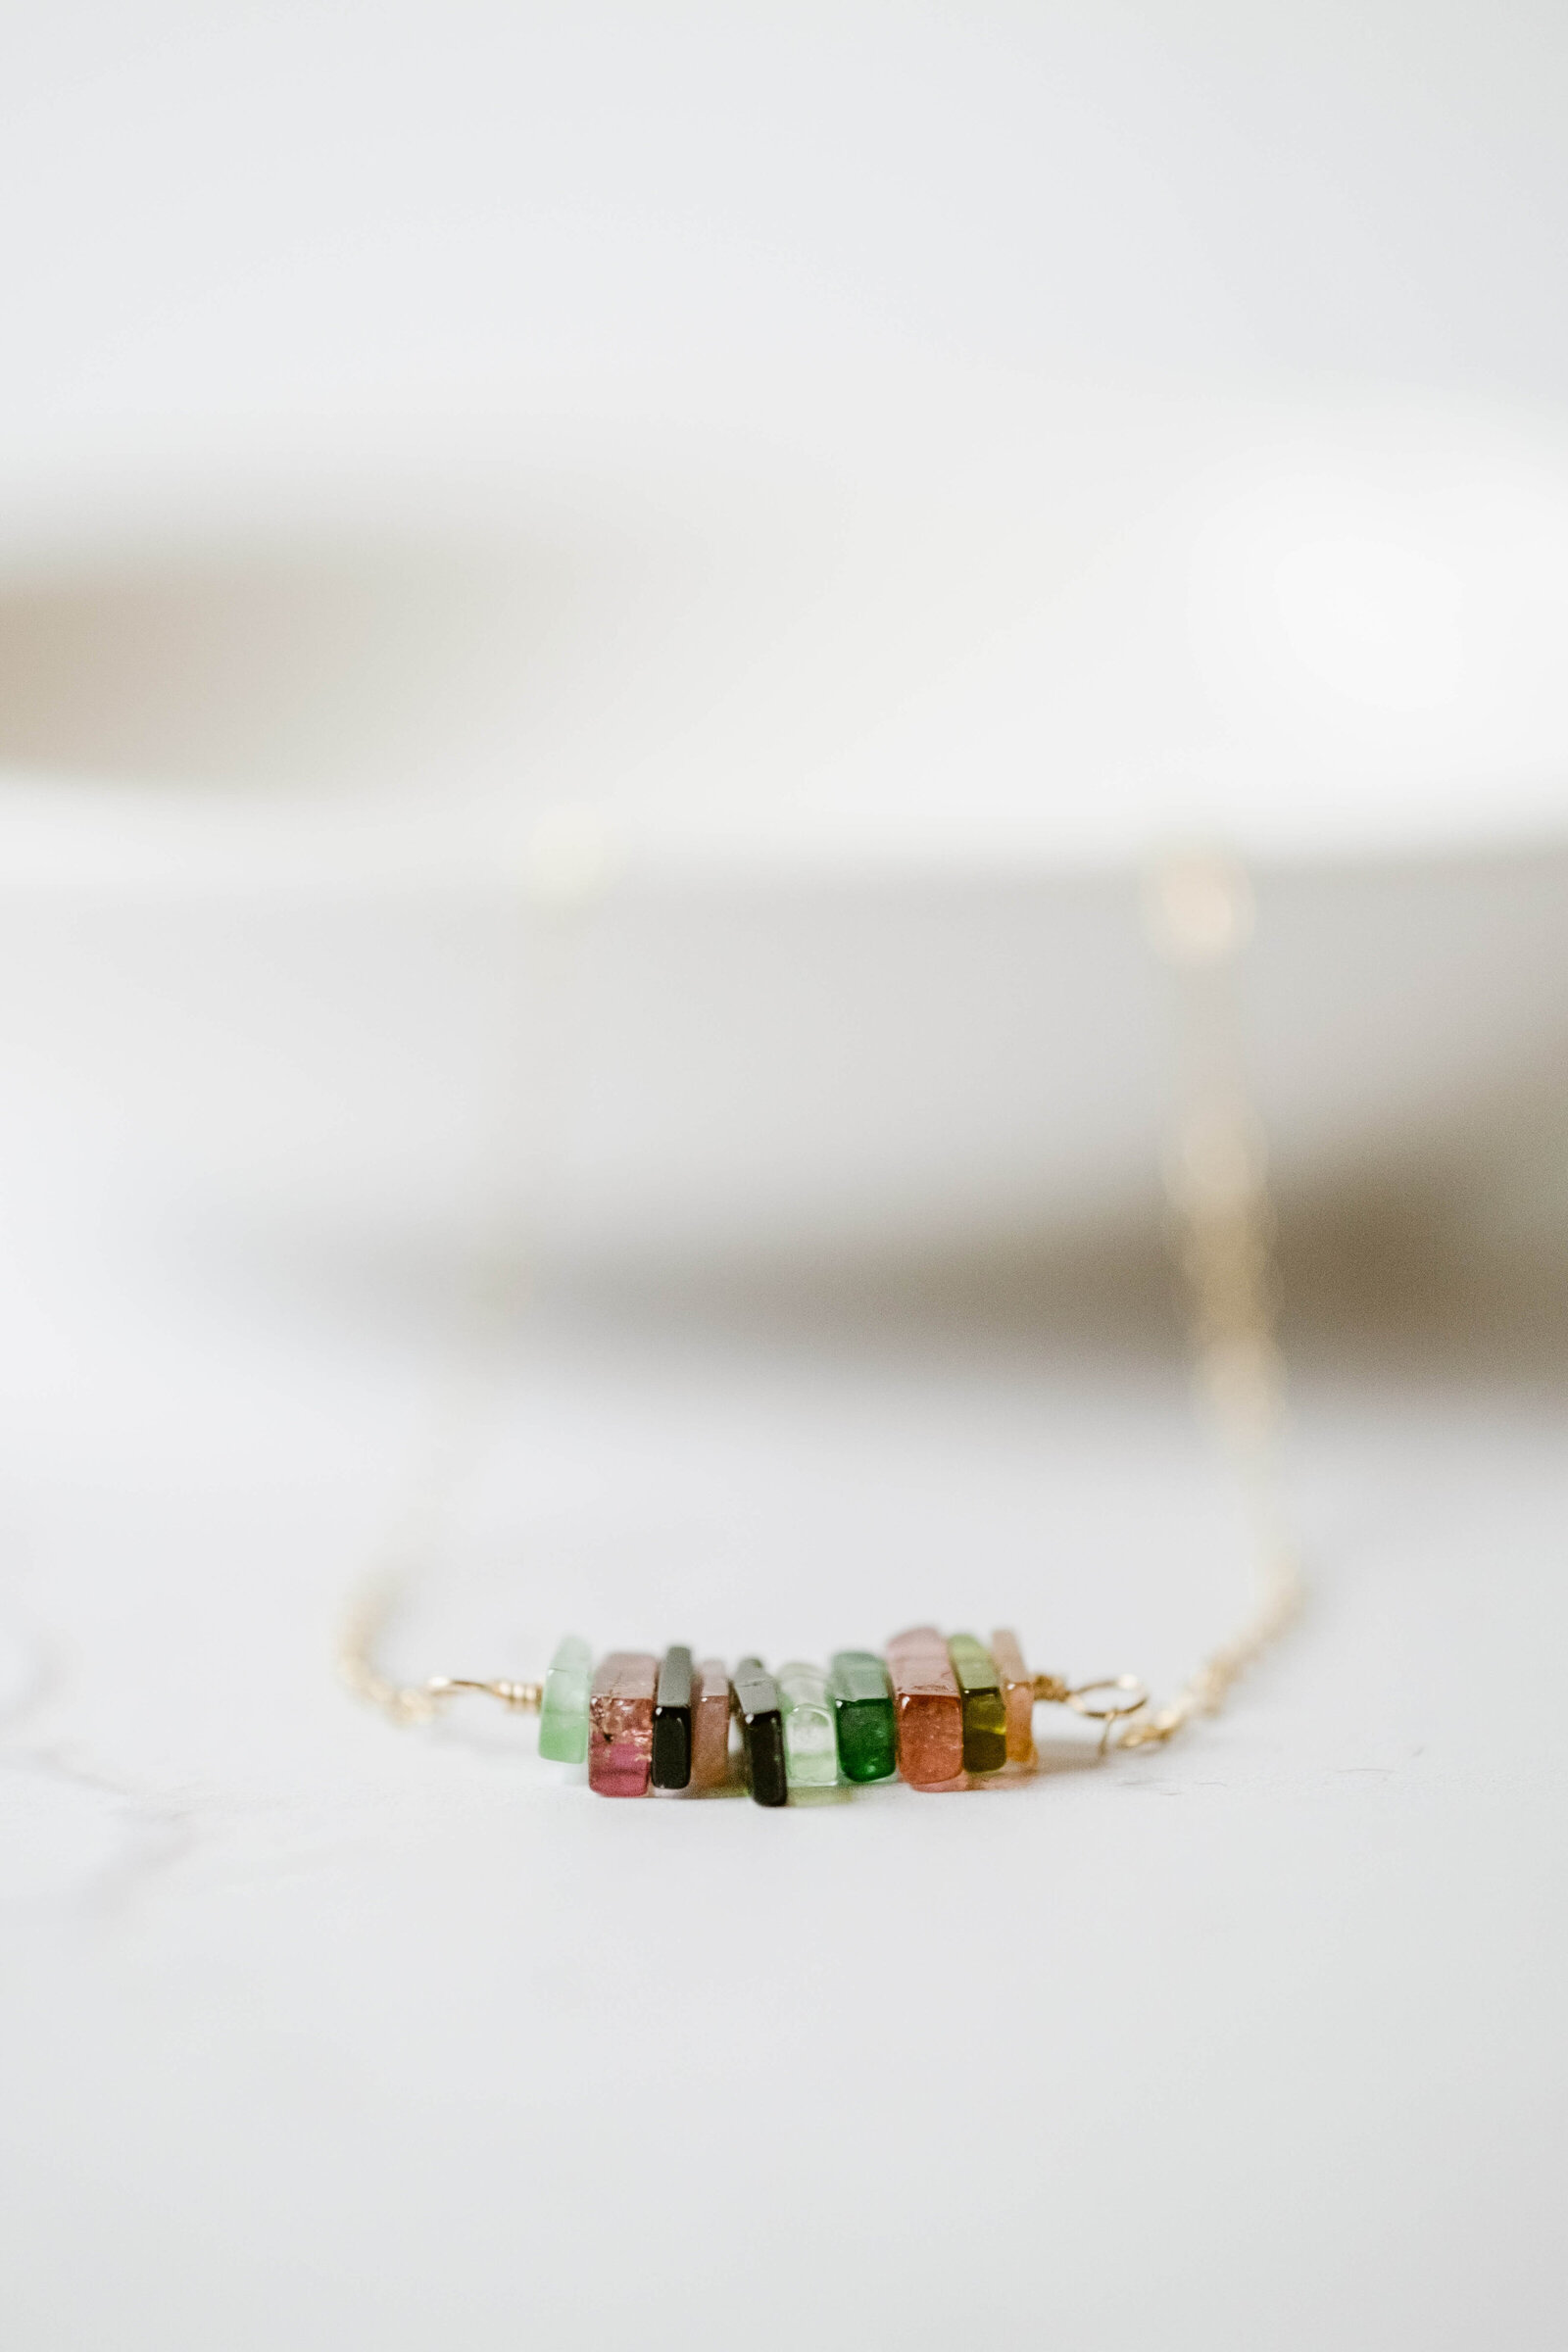 Jewelry product photography-9261